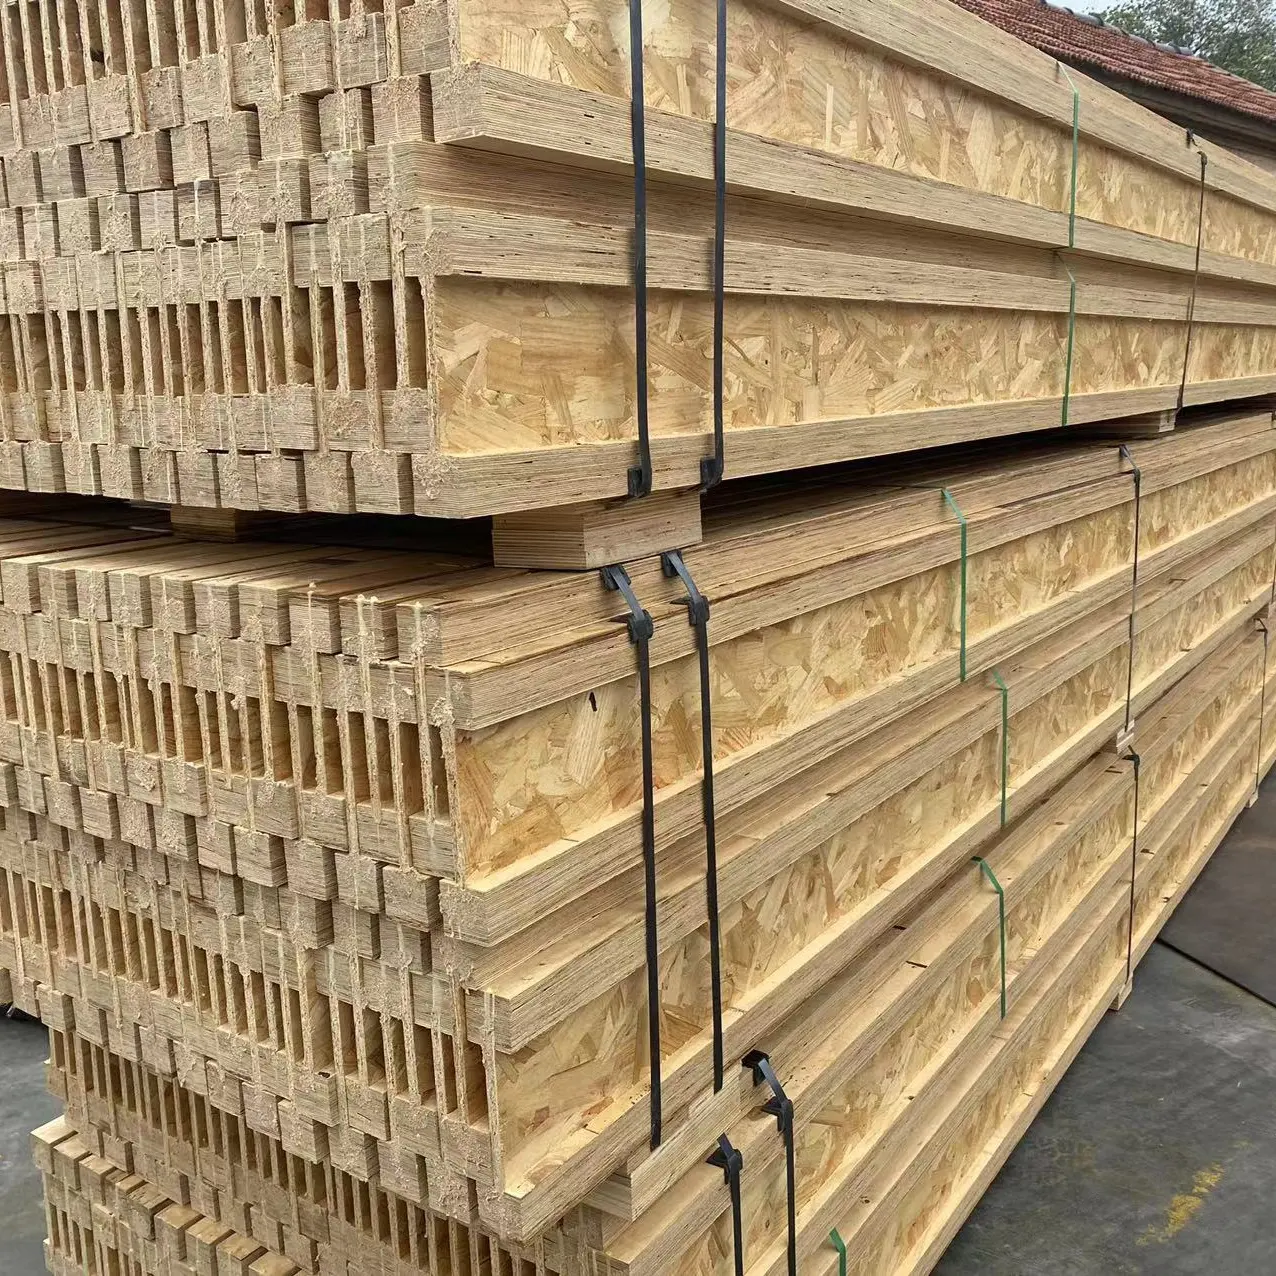 Lvl Concrete Plank Plywood Beams 2 X 4 X 8 For Construction Building Material Floor Joist